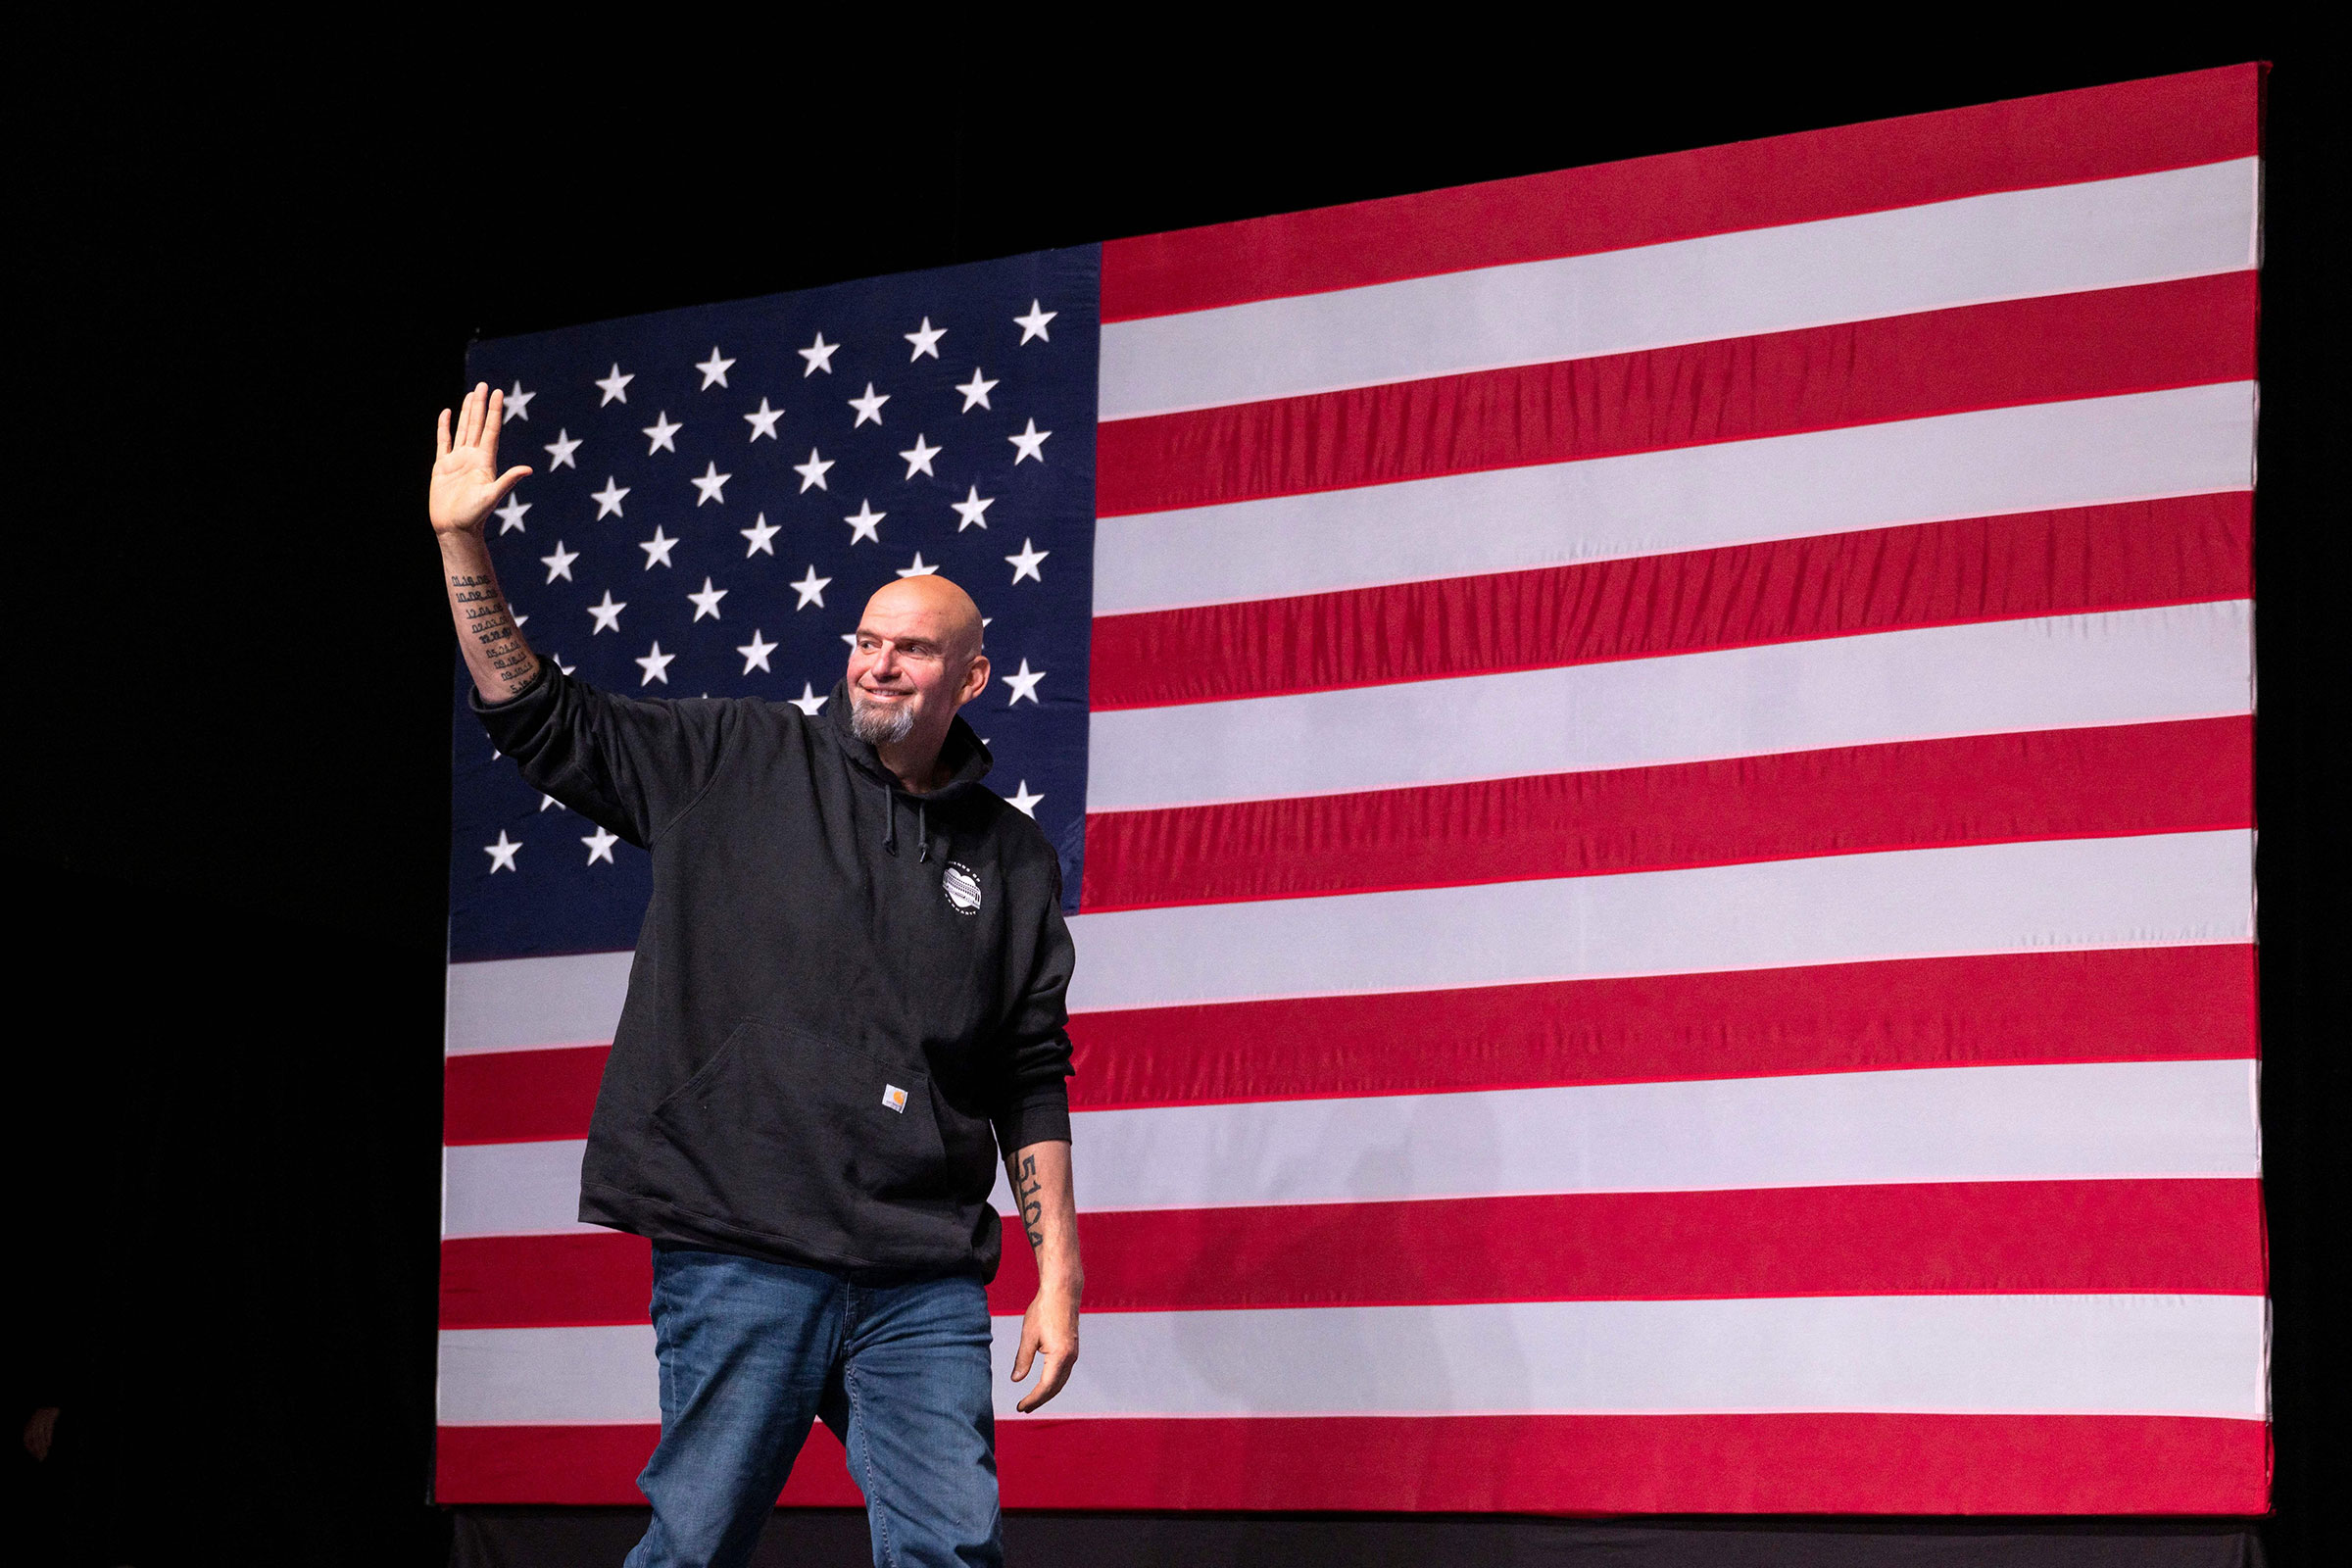 Pennsylvania Democratic Senatorial candidate John Fetterman waves as he arrives onstage at a watch party during the midterm elections at Stage AE in Pittsburgh, Pa., on Nov. 8, 2022. (Angela Weiss—AFP/Getty Images)